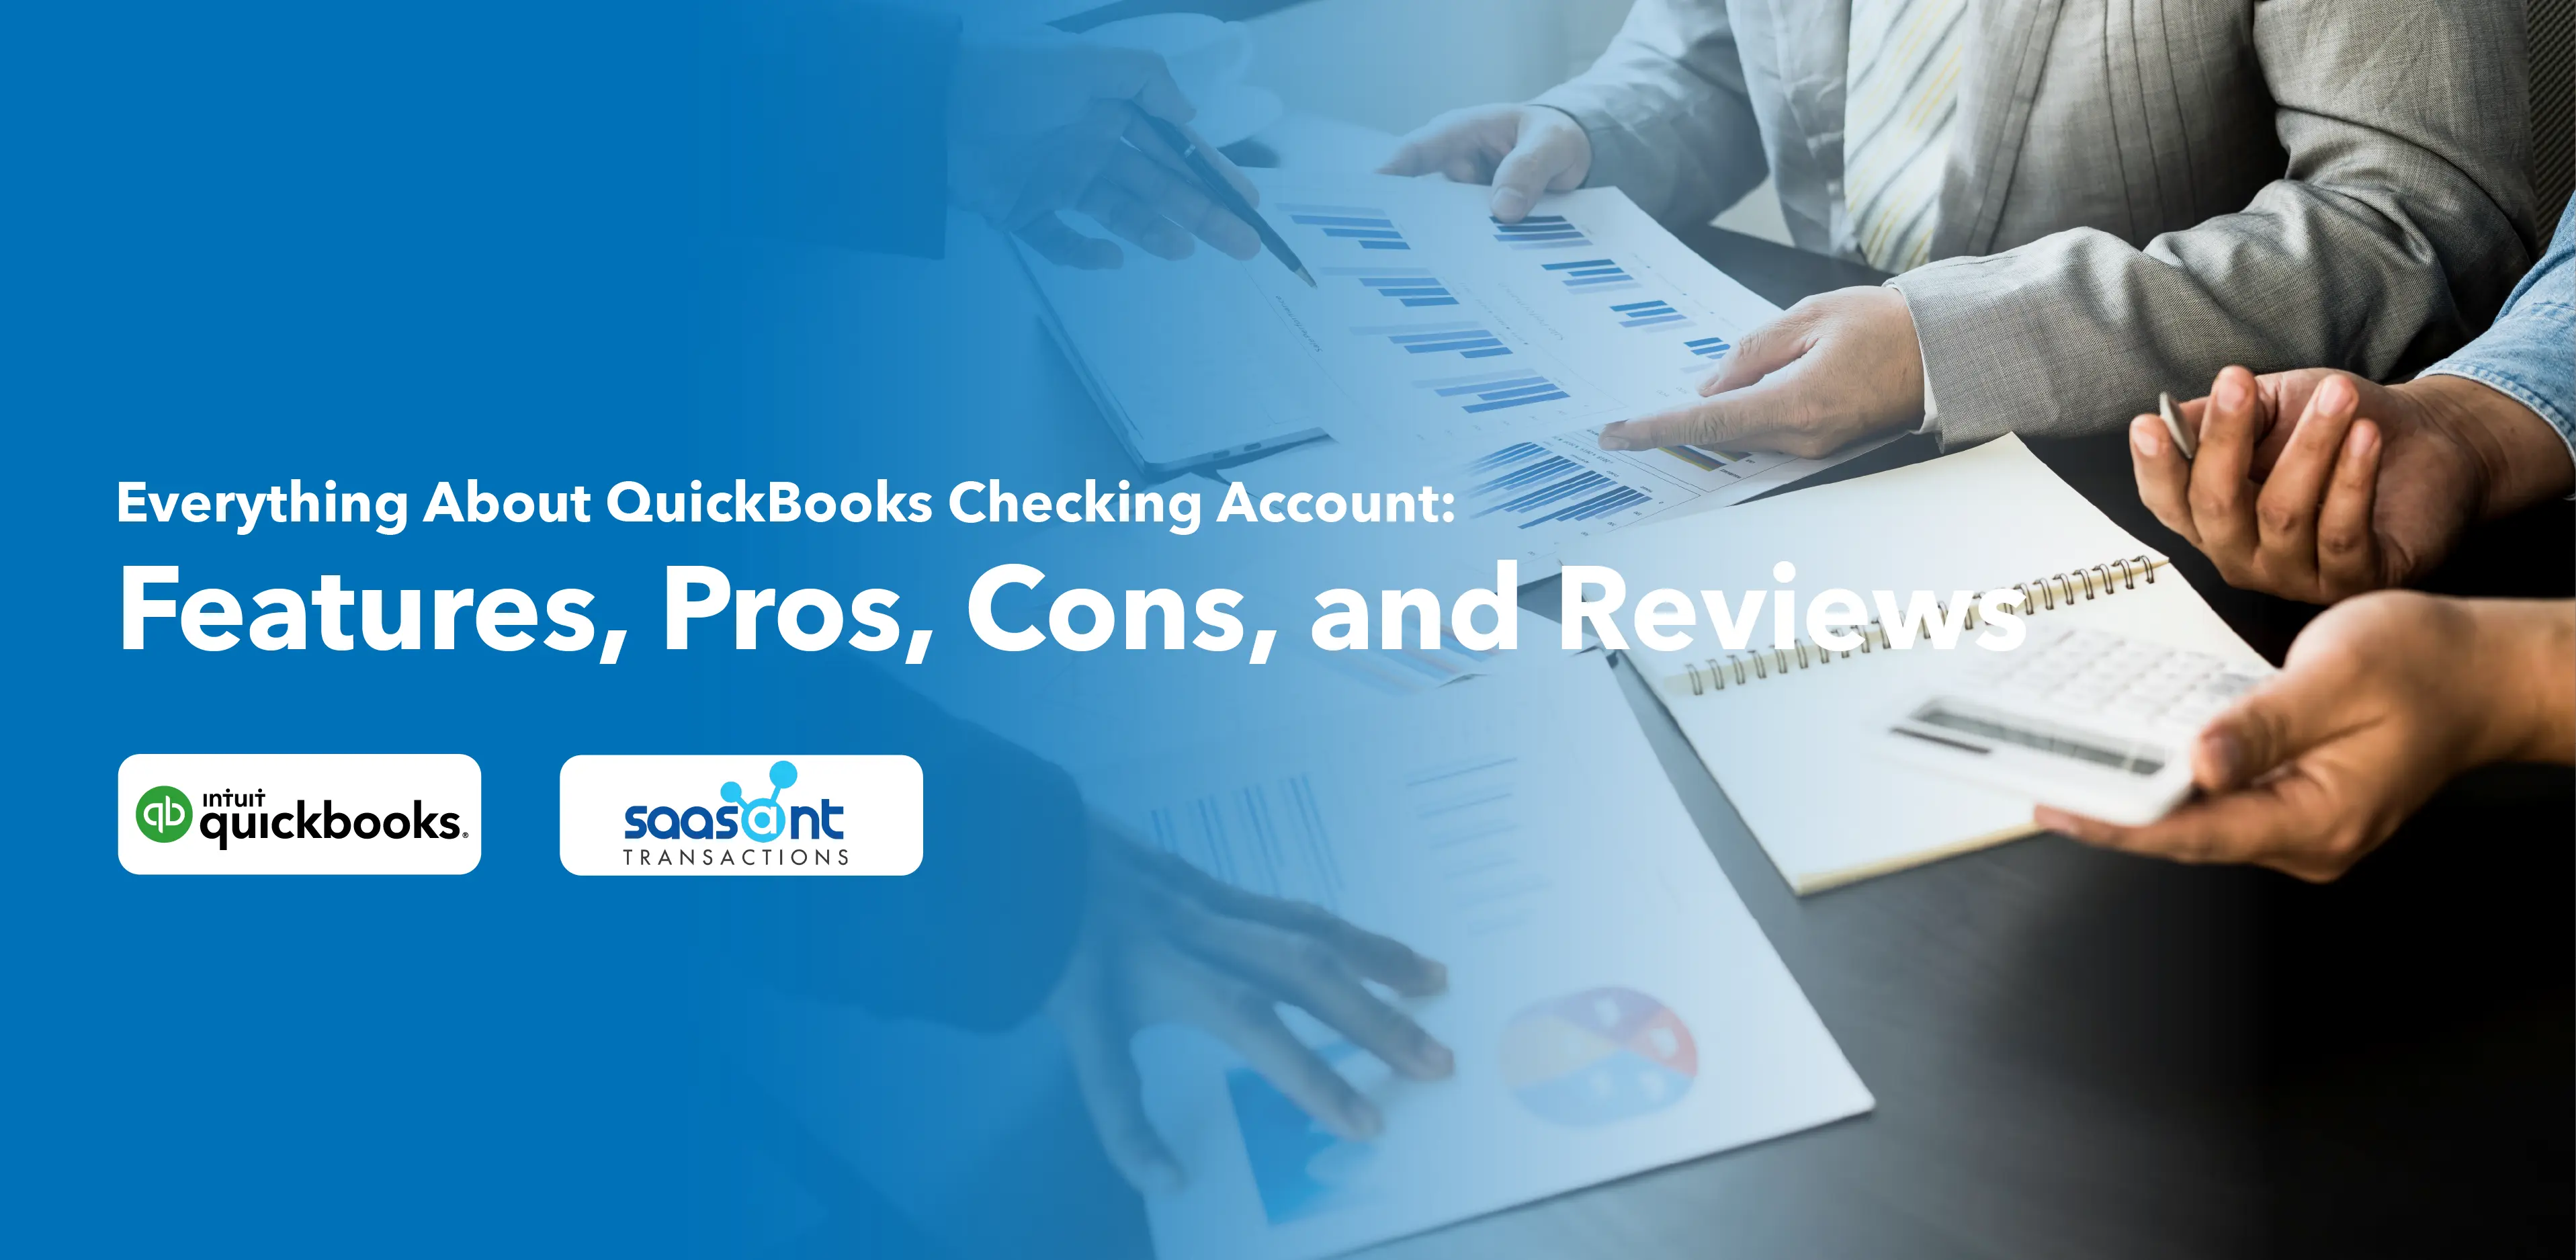 Everything About QuickBooks Checking Account Features, Pros, Cons, and